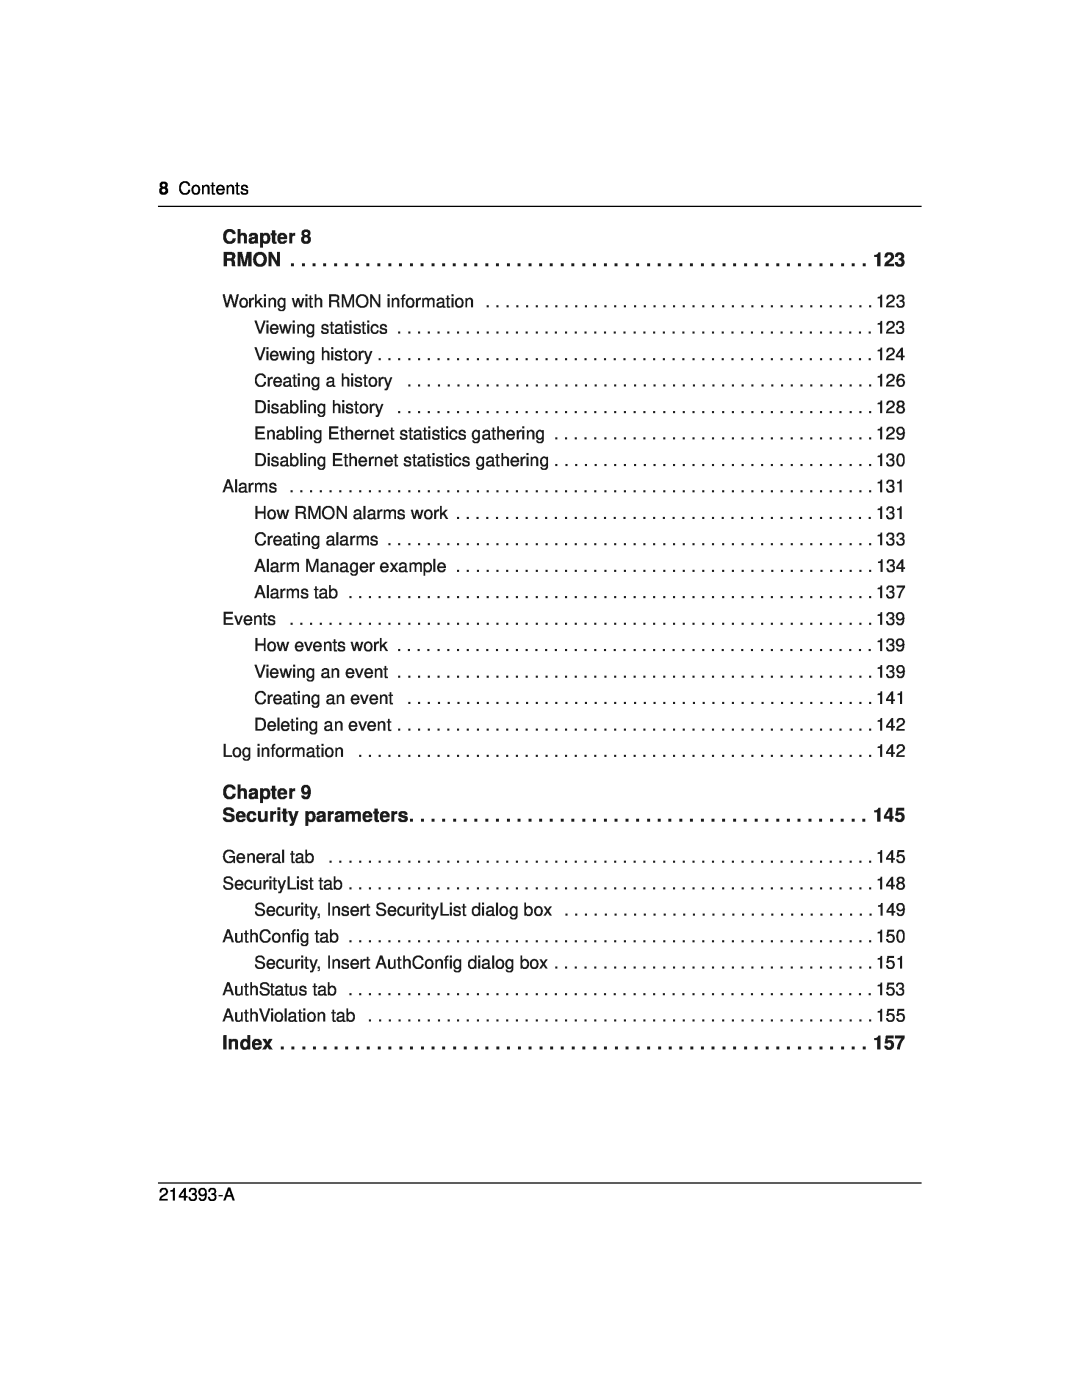 Nortel Networks 214393-A manual Chapter 